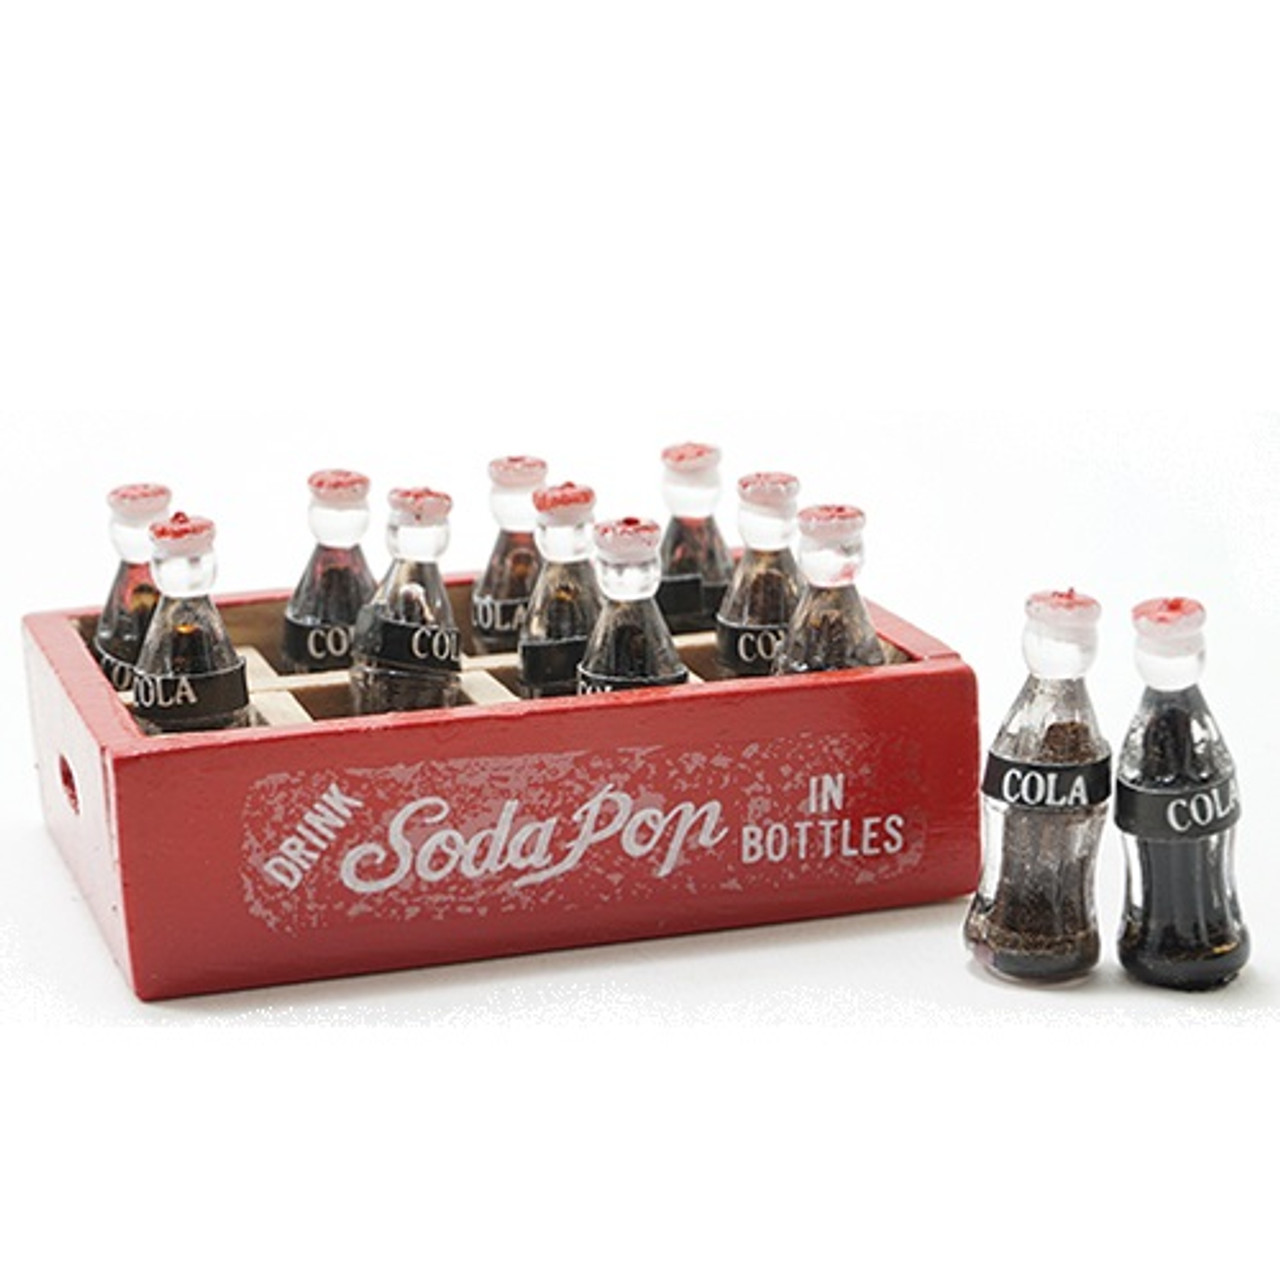 Dollhouse Miniature Cola Case with 12 Cola Bottles (IM65244); two bottles shown out of case